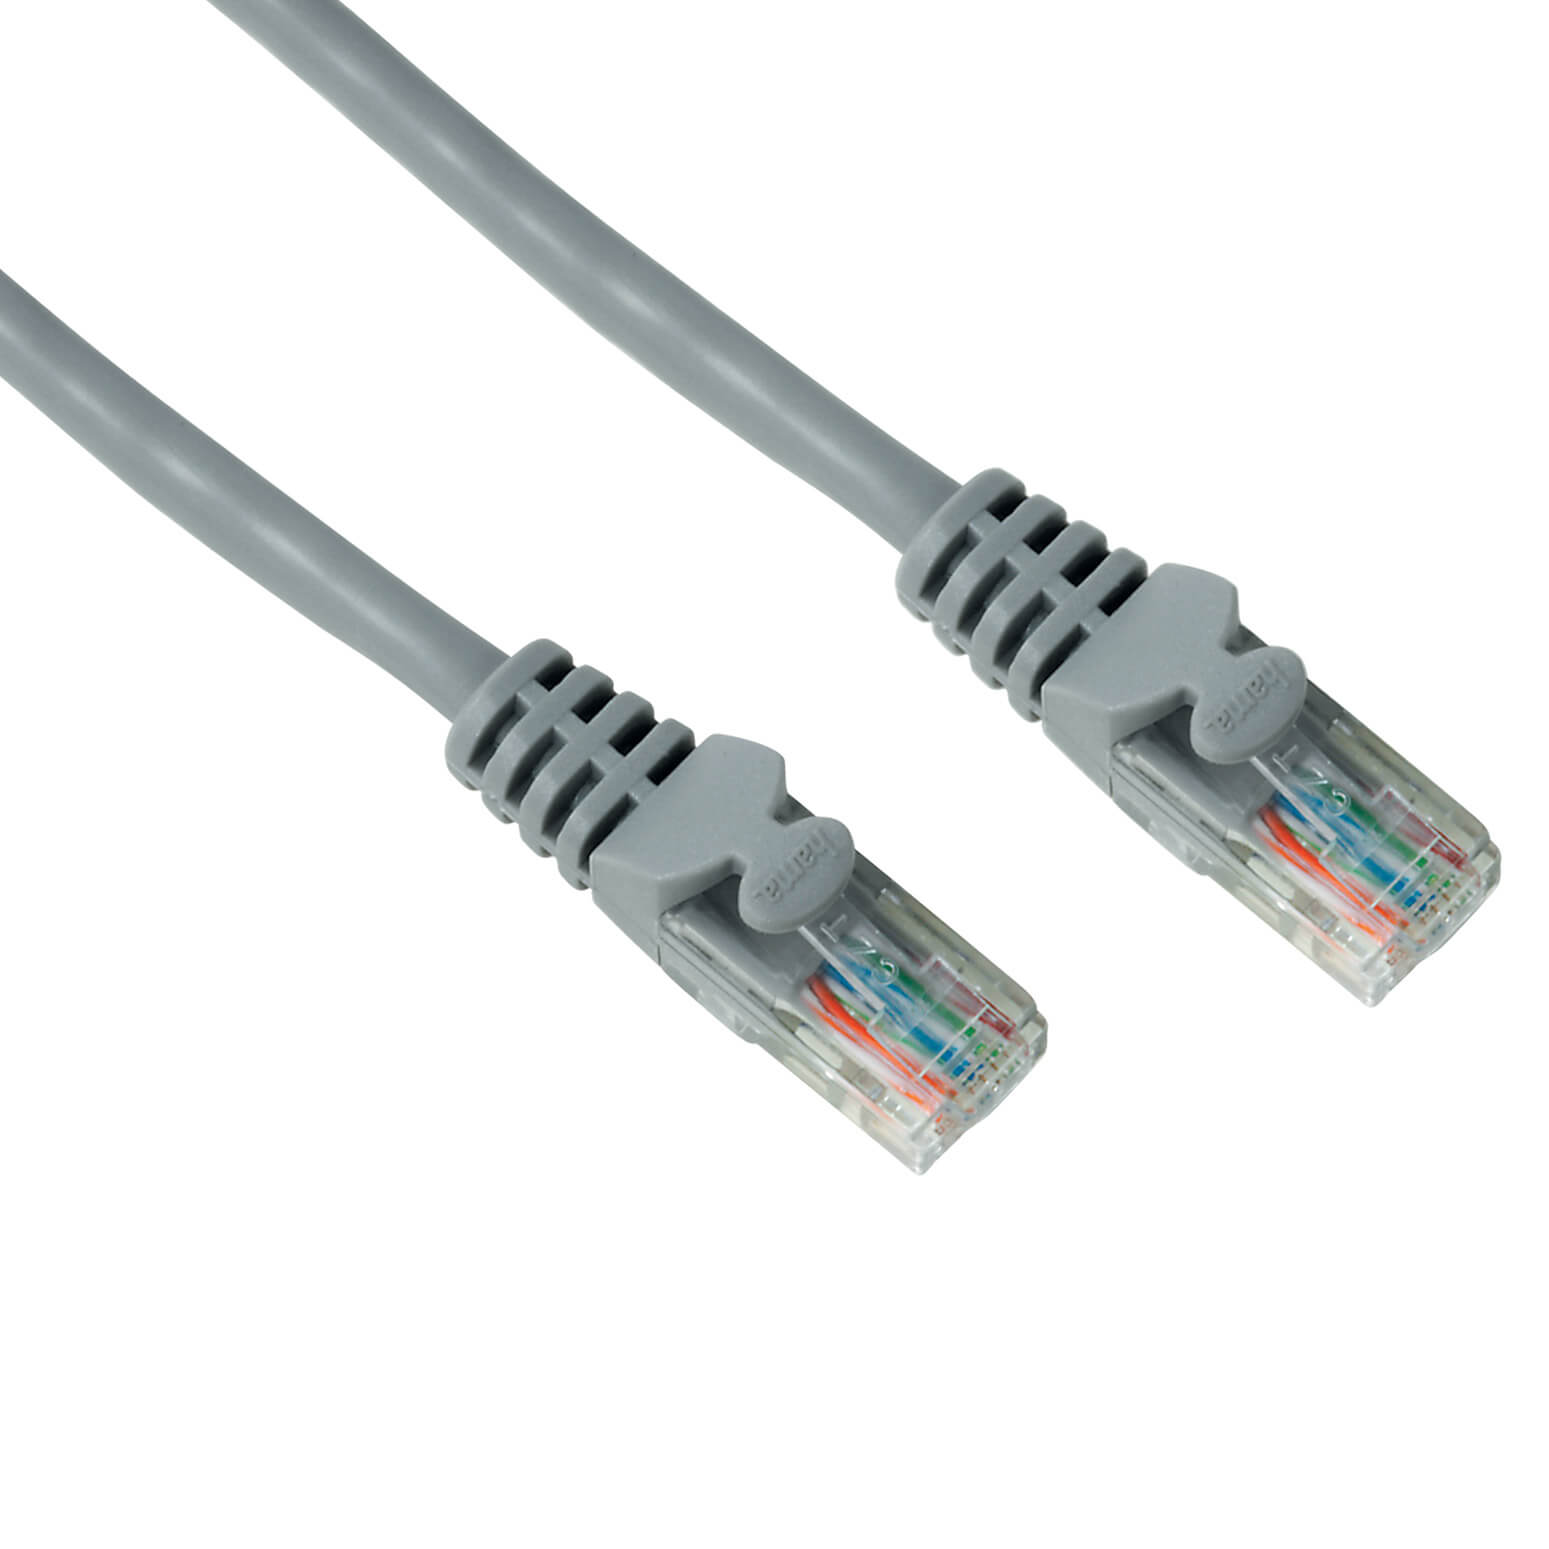 CAT 5e Network Cable UTP, gre y, 20.00 m